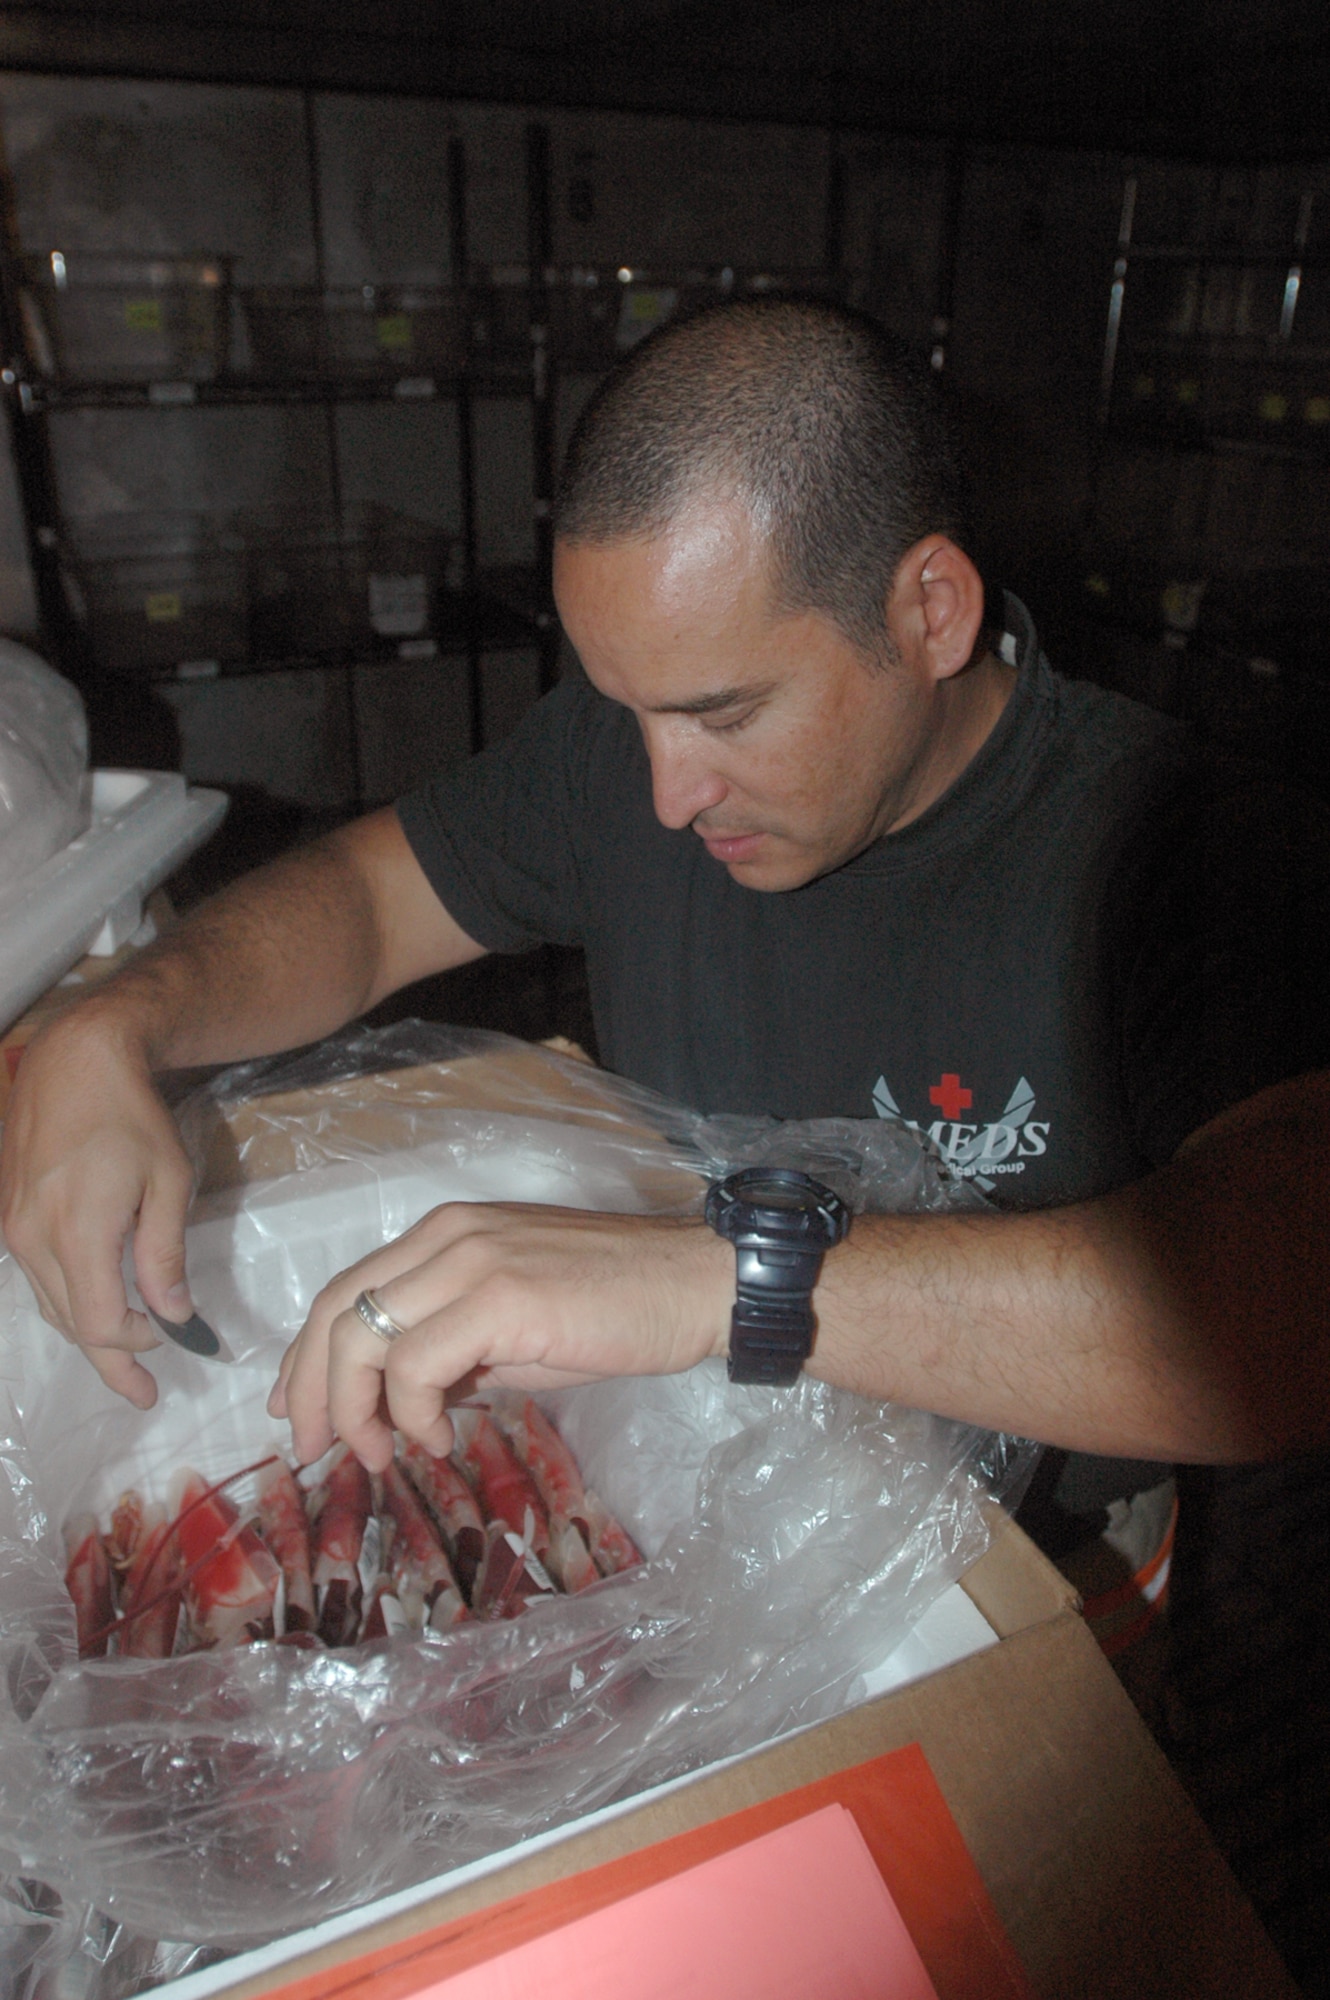 Tech. Sgt. John Joanidas, 379th Expeditionary Medical Group, sifts through blood components at the Blood Transshipment Center. The BTC supported 40 medical units by shipping 48 tons of blood products on 80 shipments, comprising 30,000 units worth $6.4 million.  (U.S. Air Force photo by Senior Airman Clark Staehle)